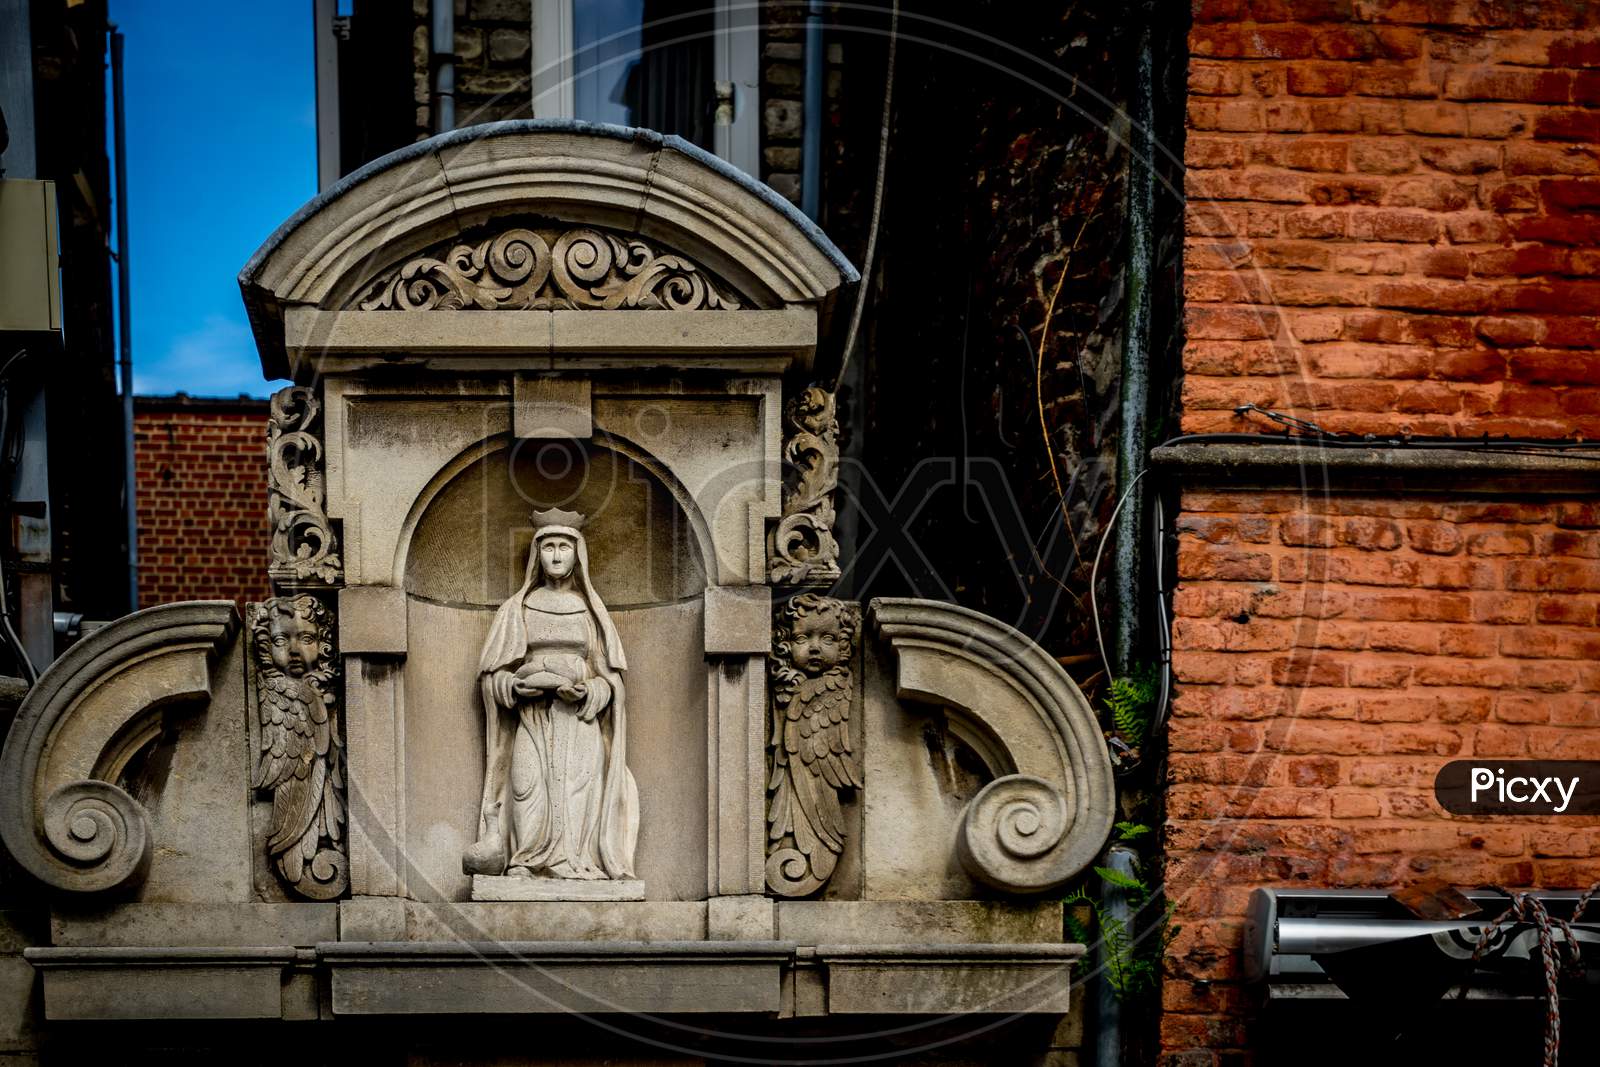 A White Sculpture Of A Madonna On The Gable House In Ghent, Belgium